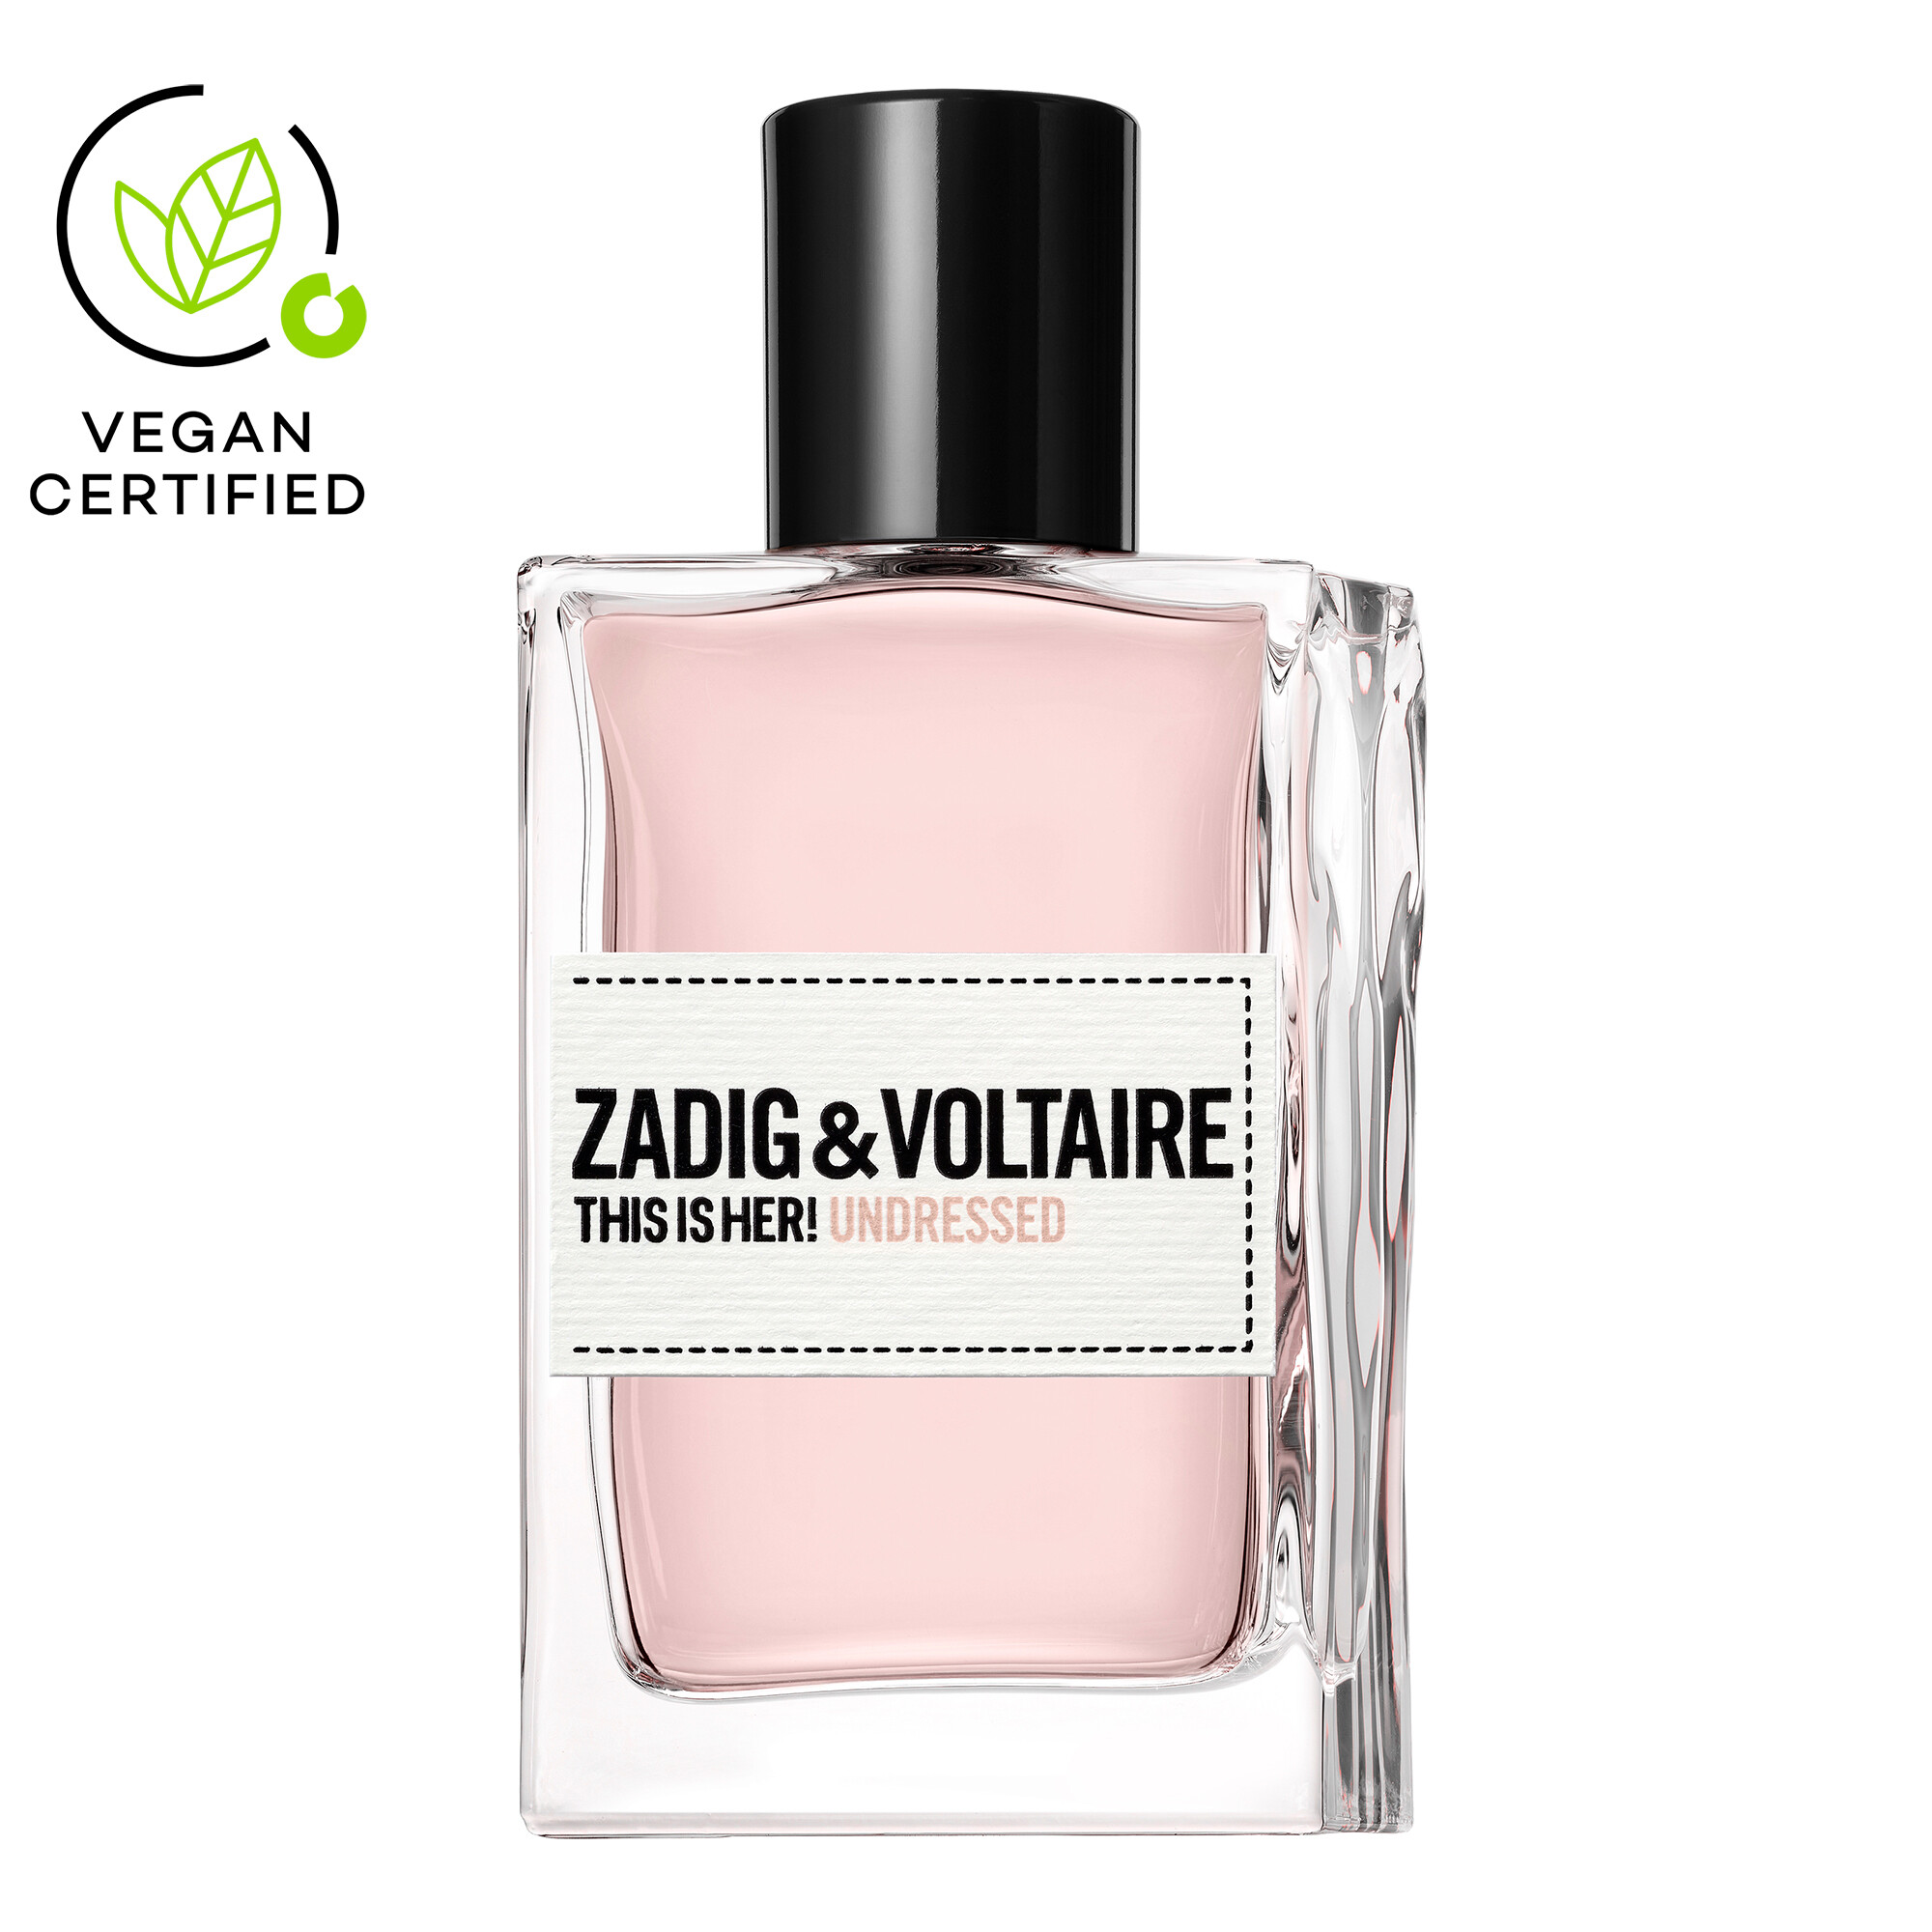 Zadig & Voltaire This is Her! Undressed EDP 50ml